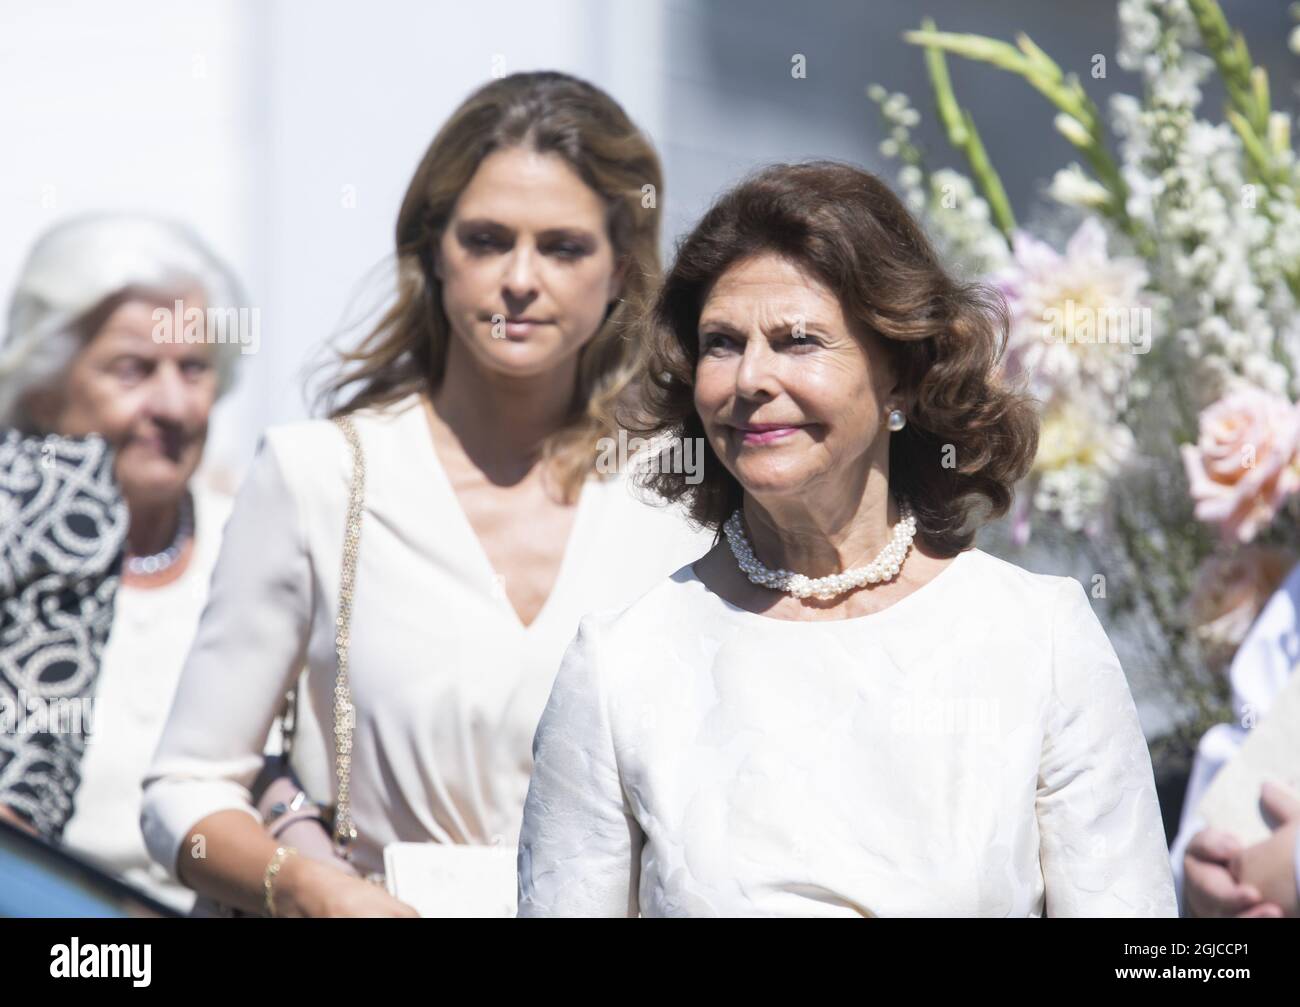 Queen Silvia, Princesss Madeleine Funeral of Anki Wallenberg in Dalaro church, Stockholm, Sweden 19 July 2019 Anki Wallenberg died in a sailing accident on the lake Geneva. She resided in London and was a close friend to the Swedish Royal Family. (c) Patrik Ã–sterberg / TT / kod 2857  Stock Photo